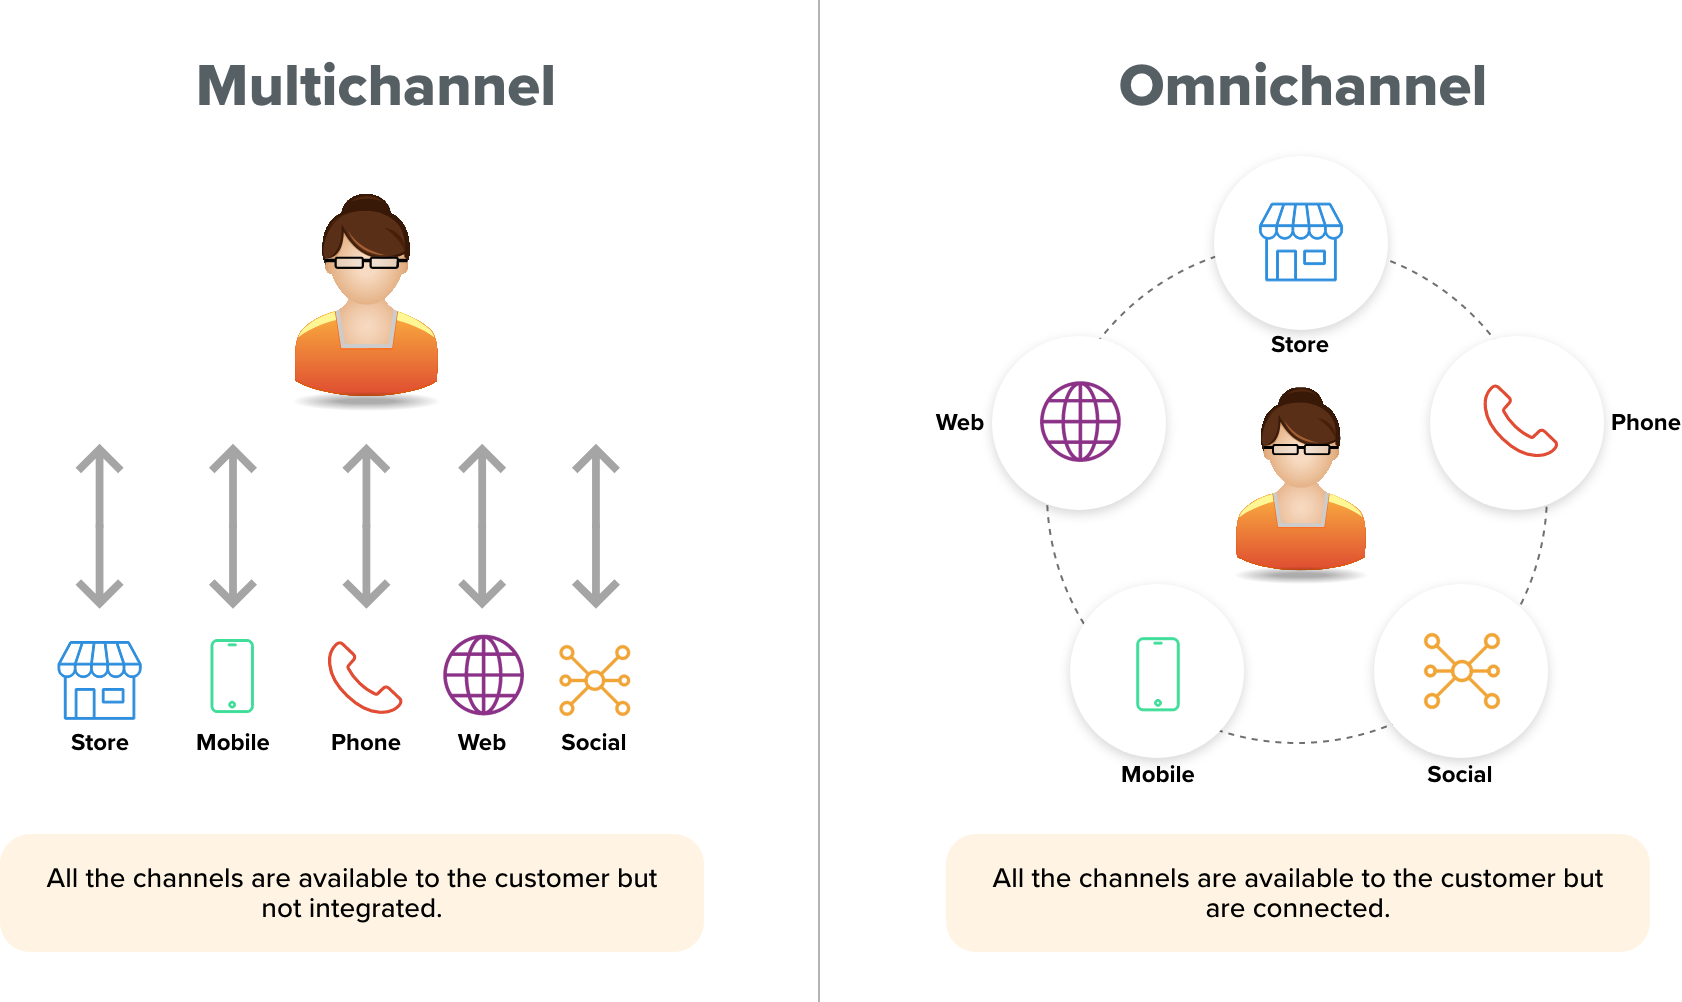 Difference between Omnichannel and Multichannel Experience